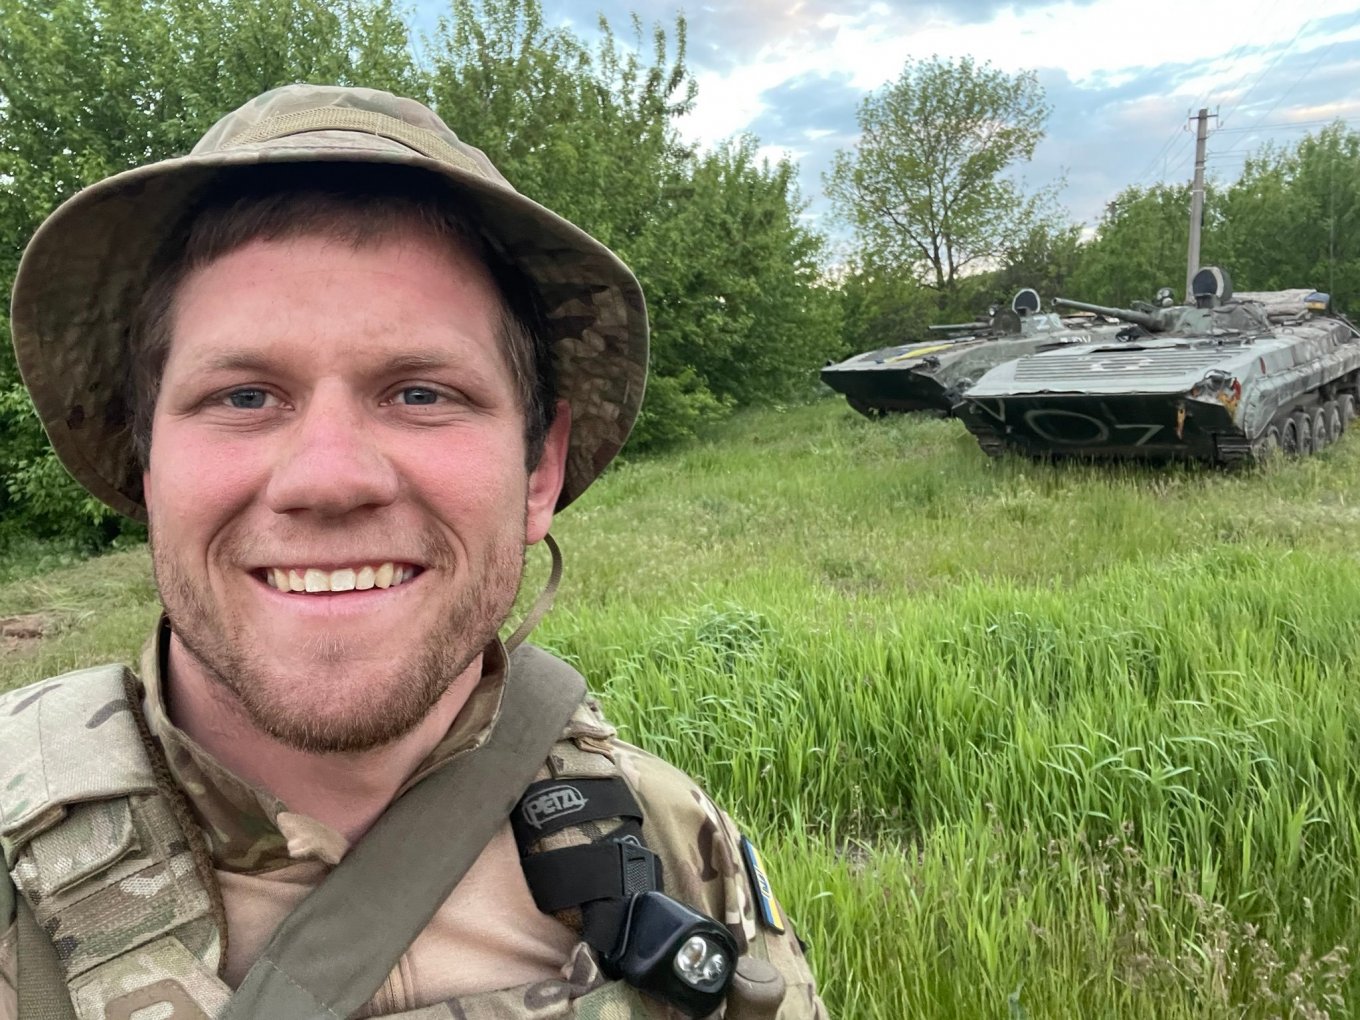 Ukrainian forces also captured a pair of Russian BMP-1 IFVs at the same time. It is notable that in recent times BMP-1 have appeared more and more, whilst during the earlier Russian campaigns they were uncommon, Defense Express